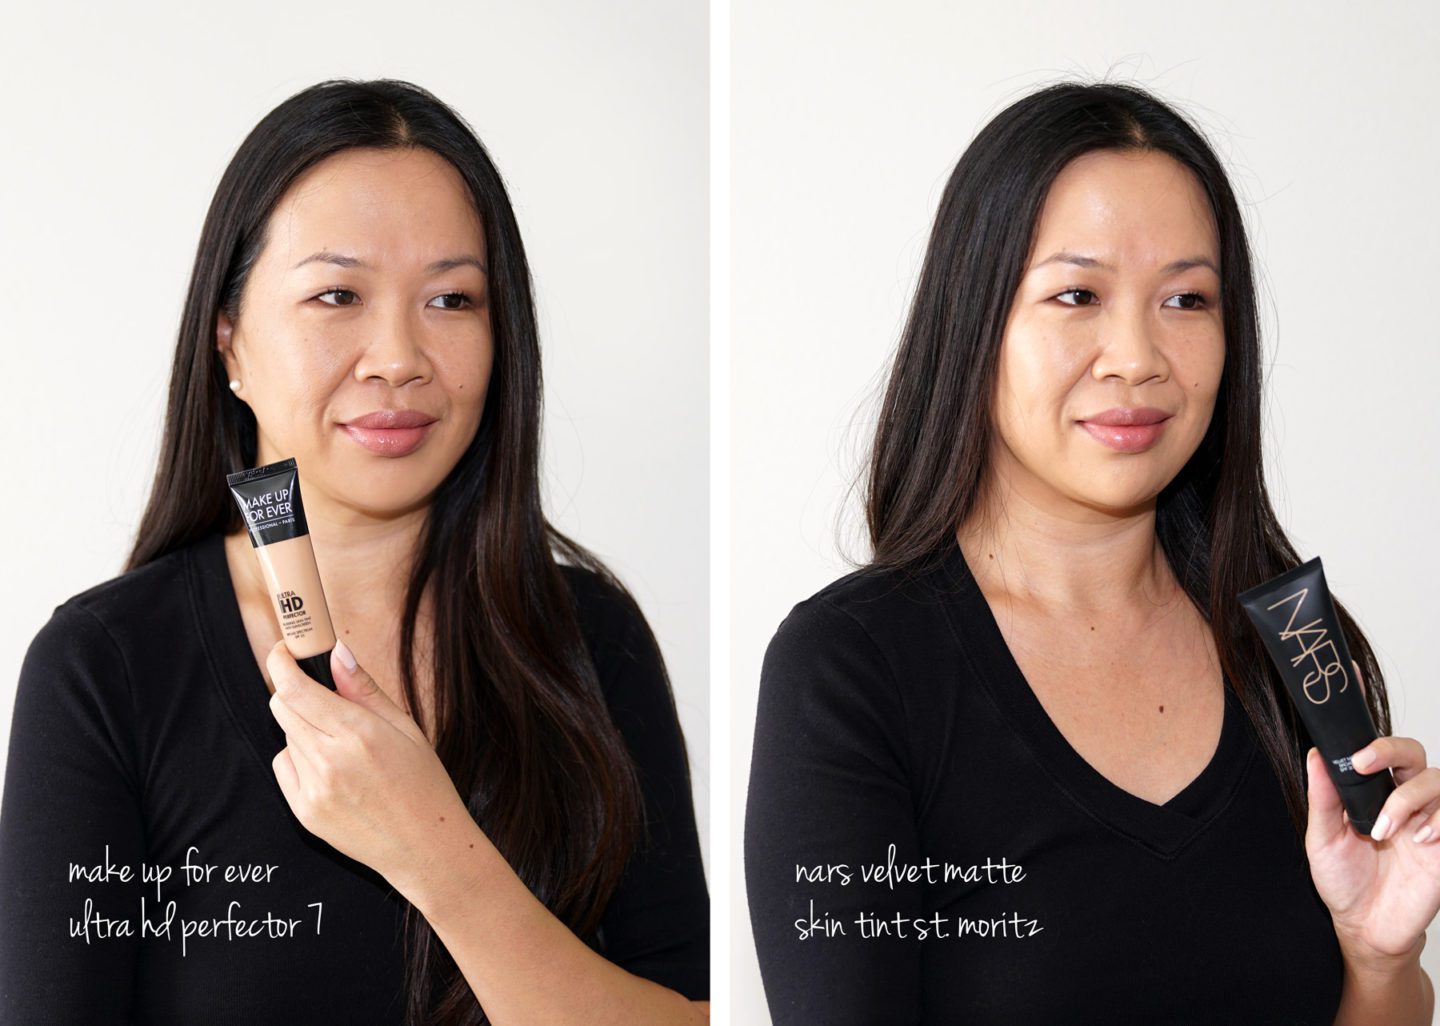 Make Up For Ever Ultra HD Perfector Shade 7 and NARS Velvet Matte Skin Tint St. Moritz swatches